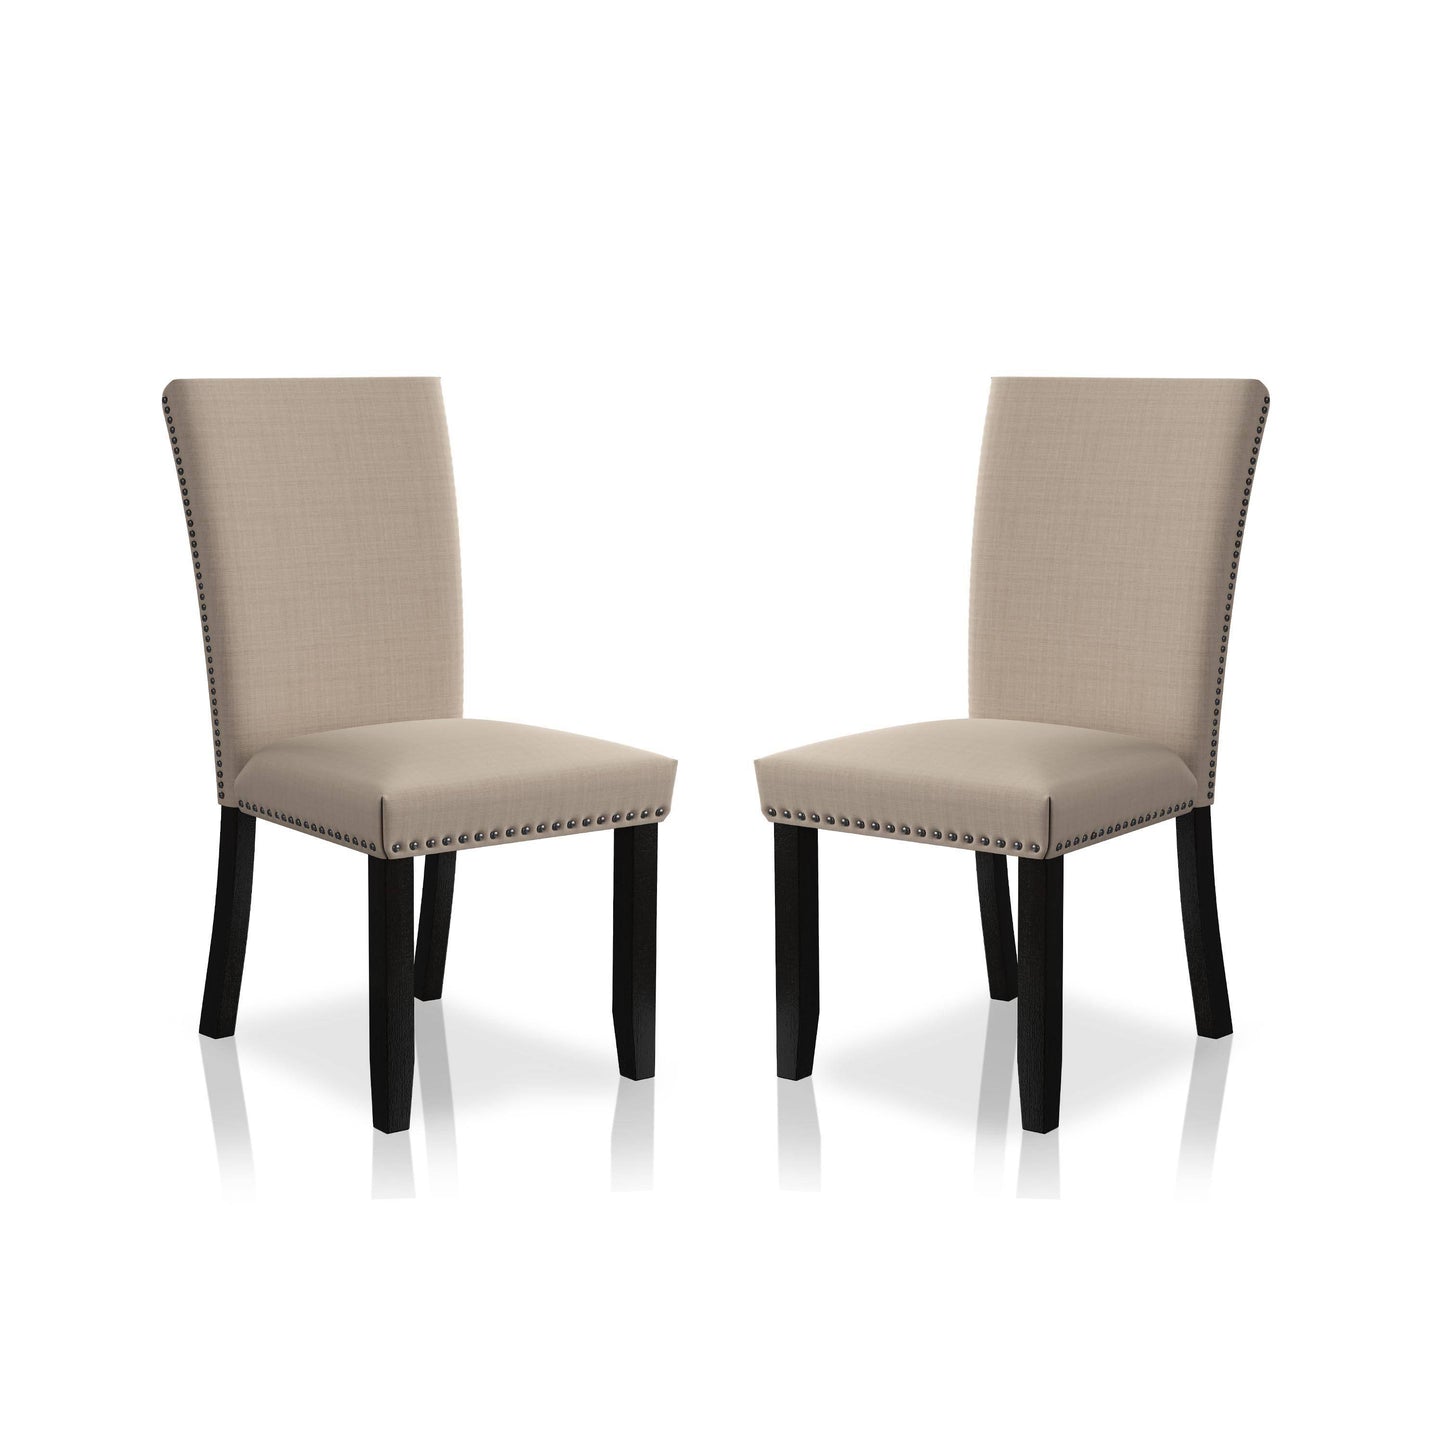 Southwind Upholstered Side Chairs in Beige (Set of 2)